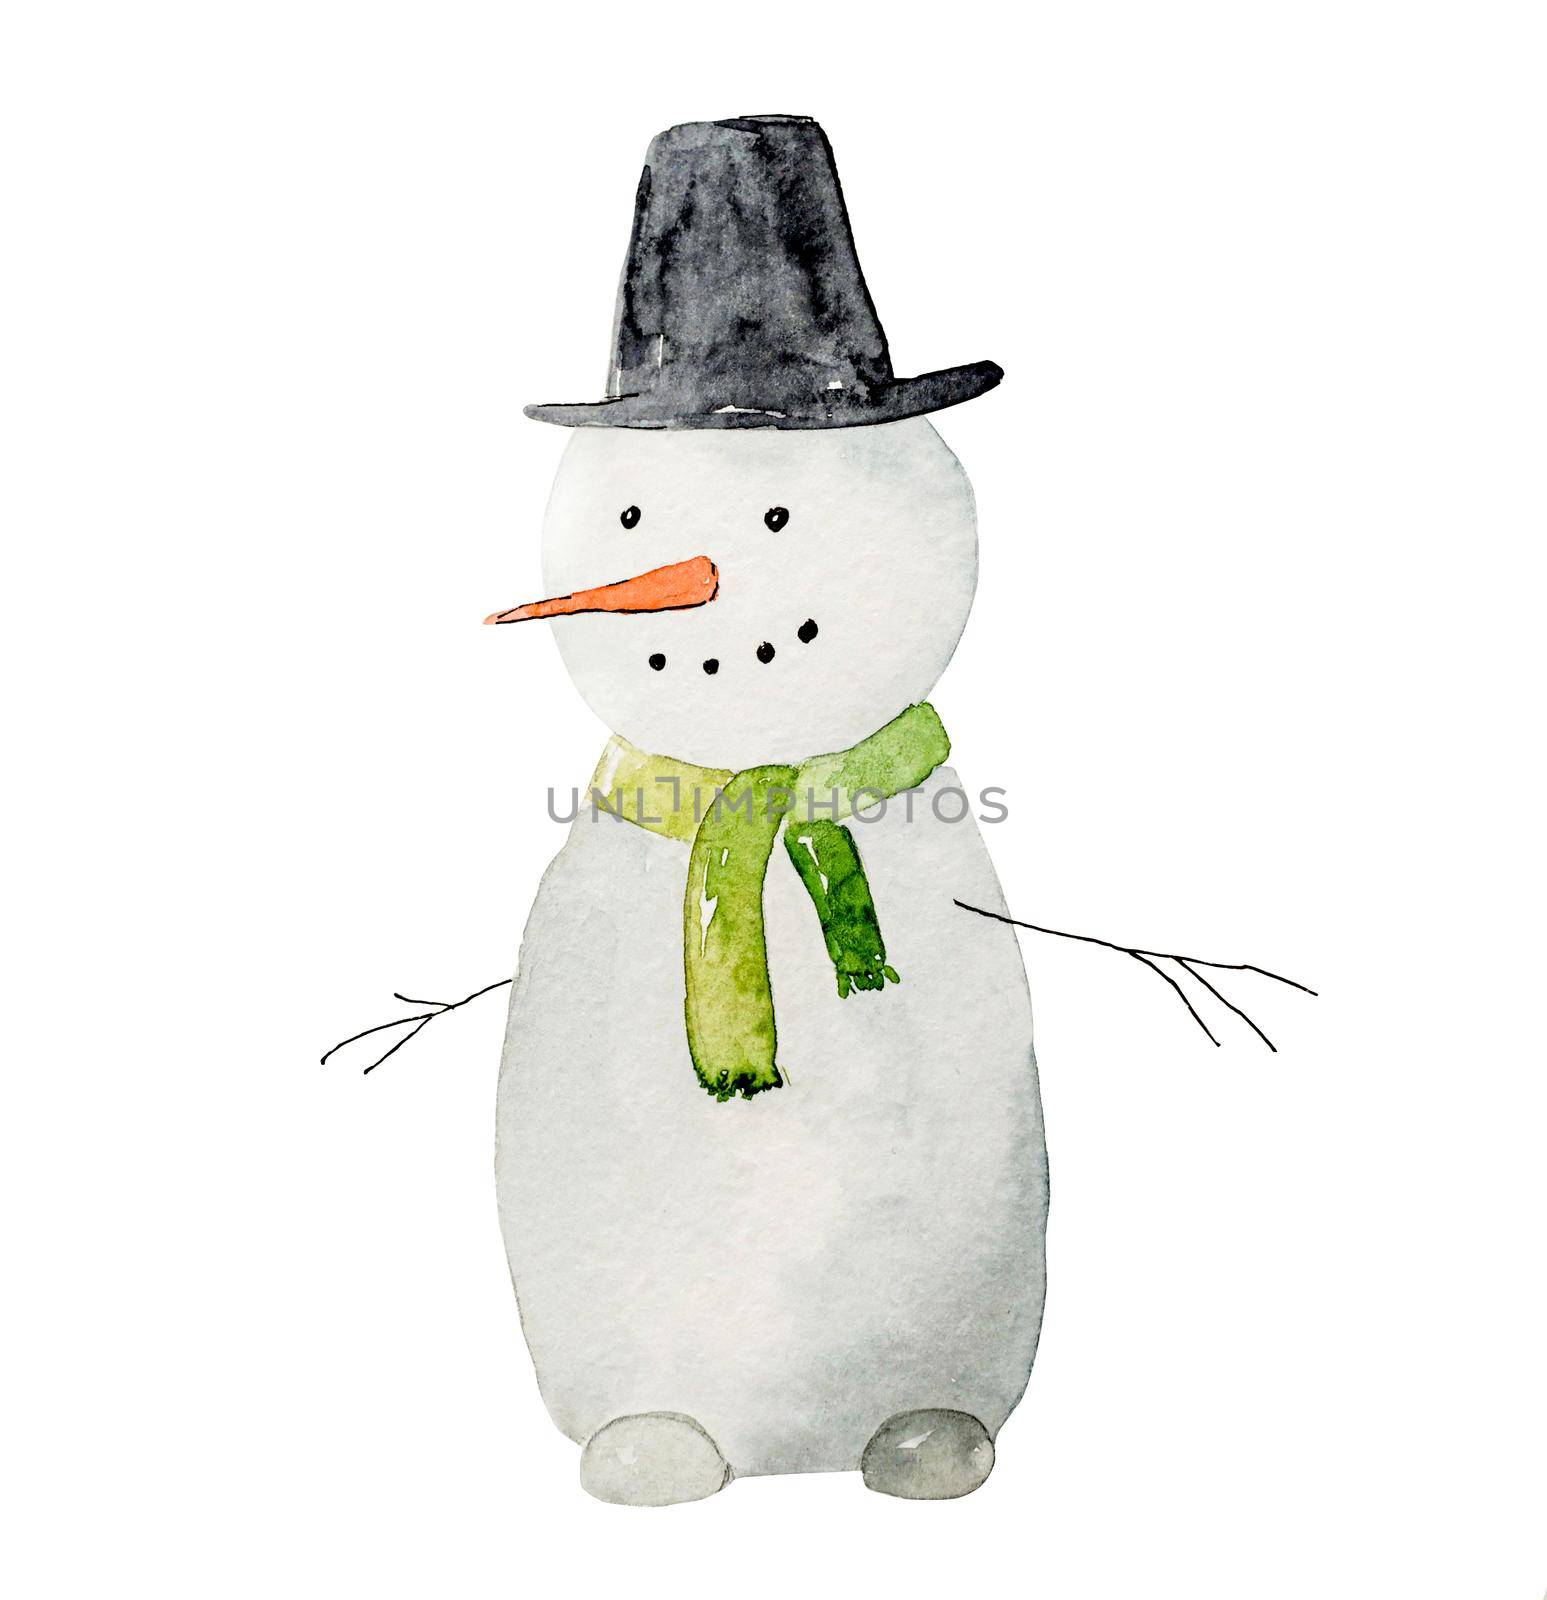 Christmas card with smiling snowman painted with watercolor, wearing hat and isolated on white background. New Year festive art with beautiful Xmas character drawn with aquarelle